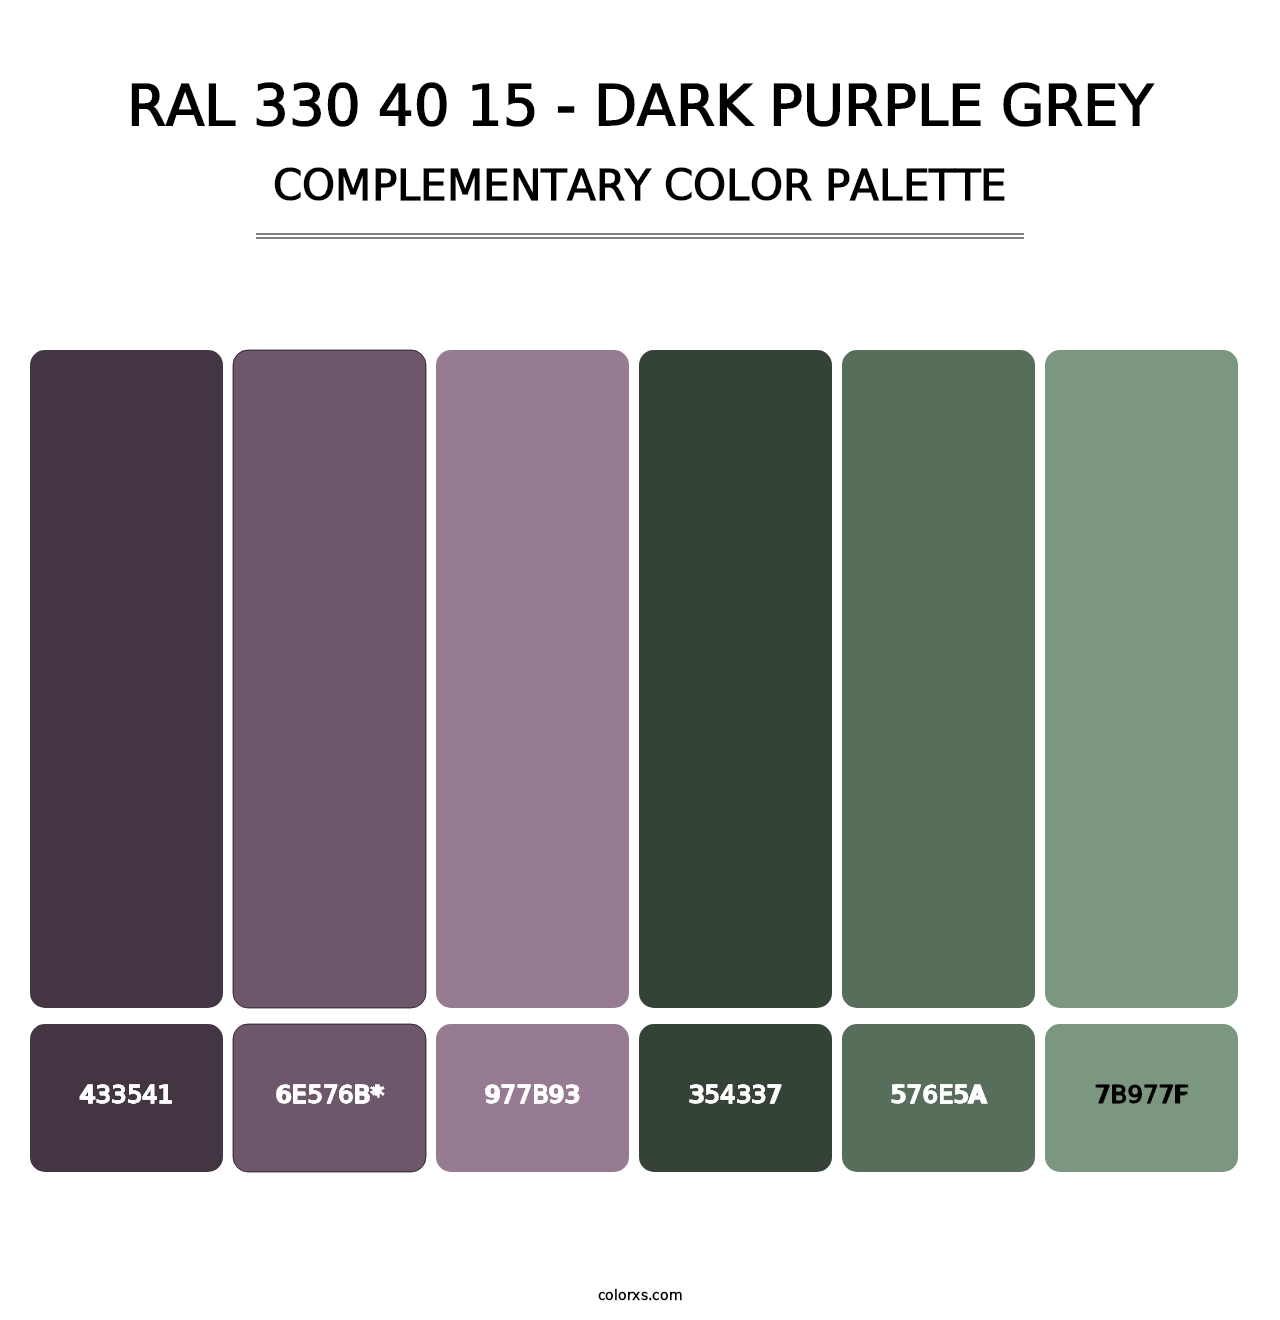 RAL 330 40 15 - Dark Purple Grey - Complementary Color Palette